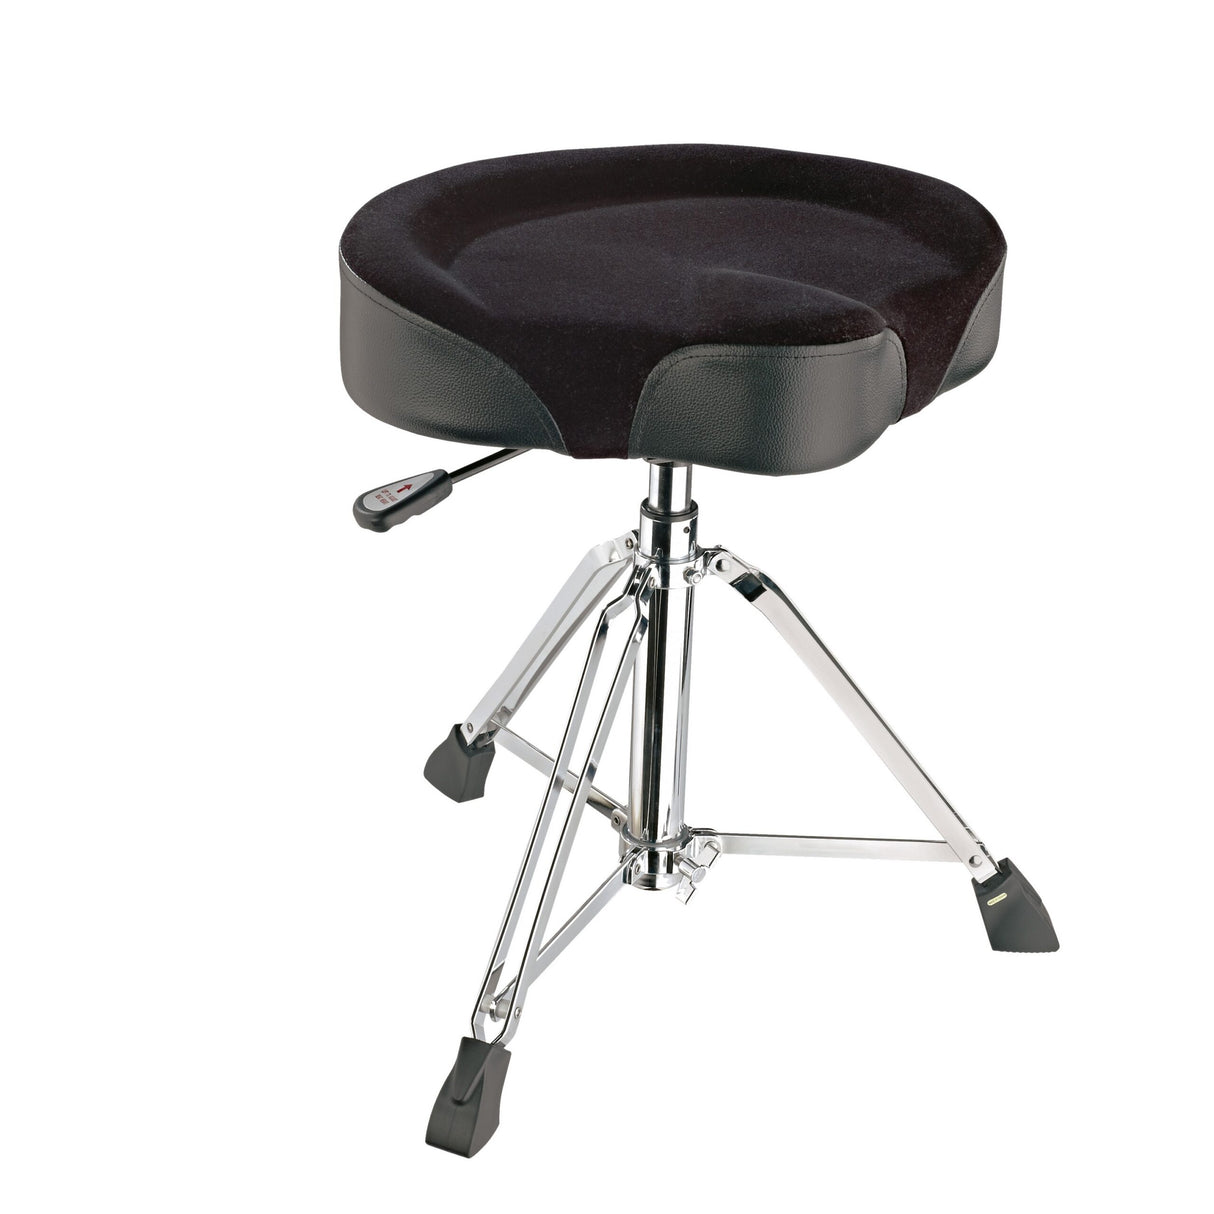 K&M 14036 Drummers Throne Chair with Pneumatic Spring, Black